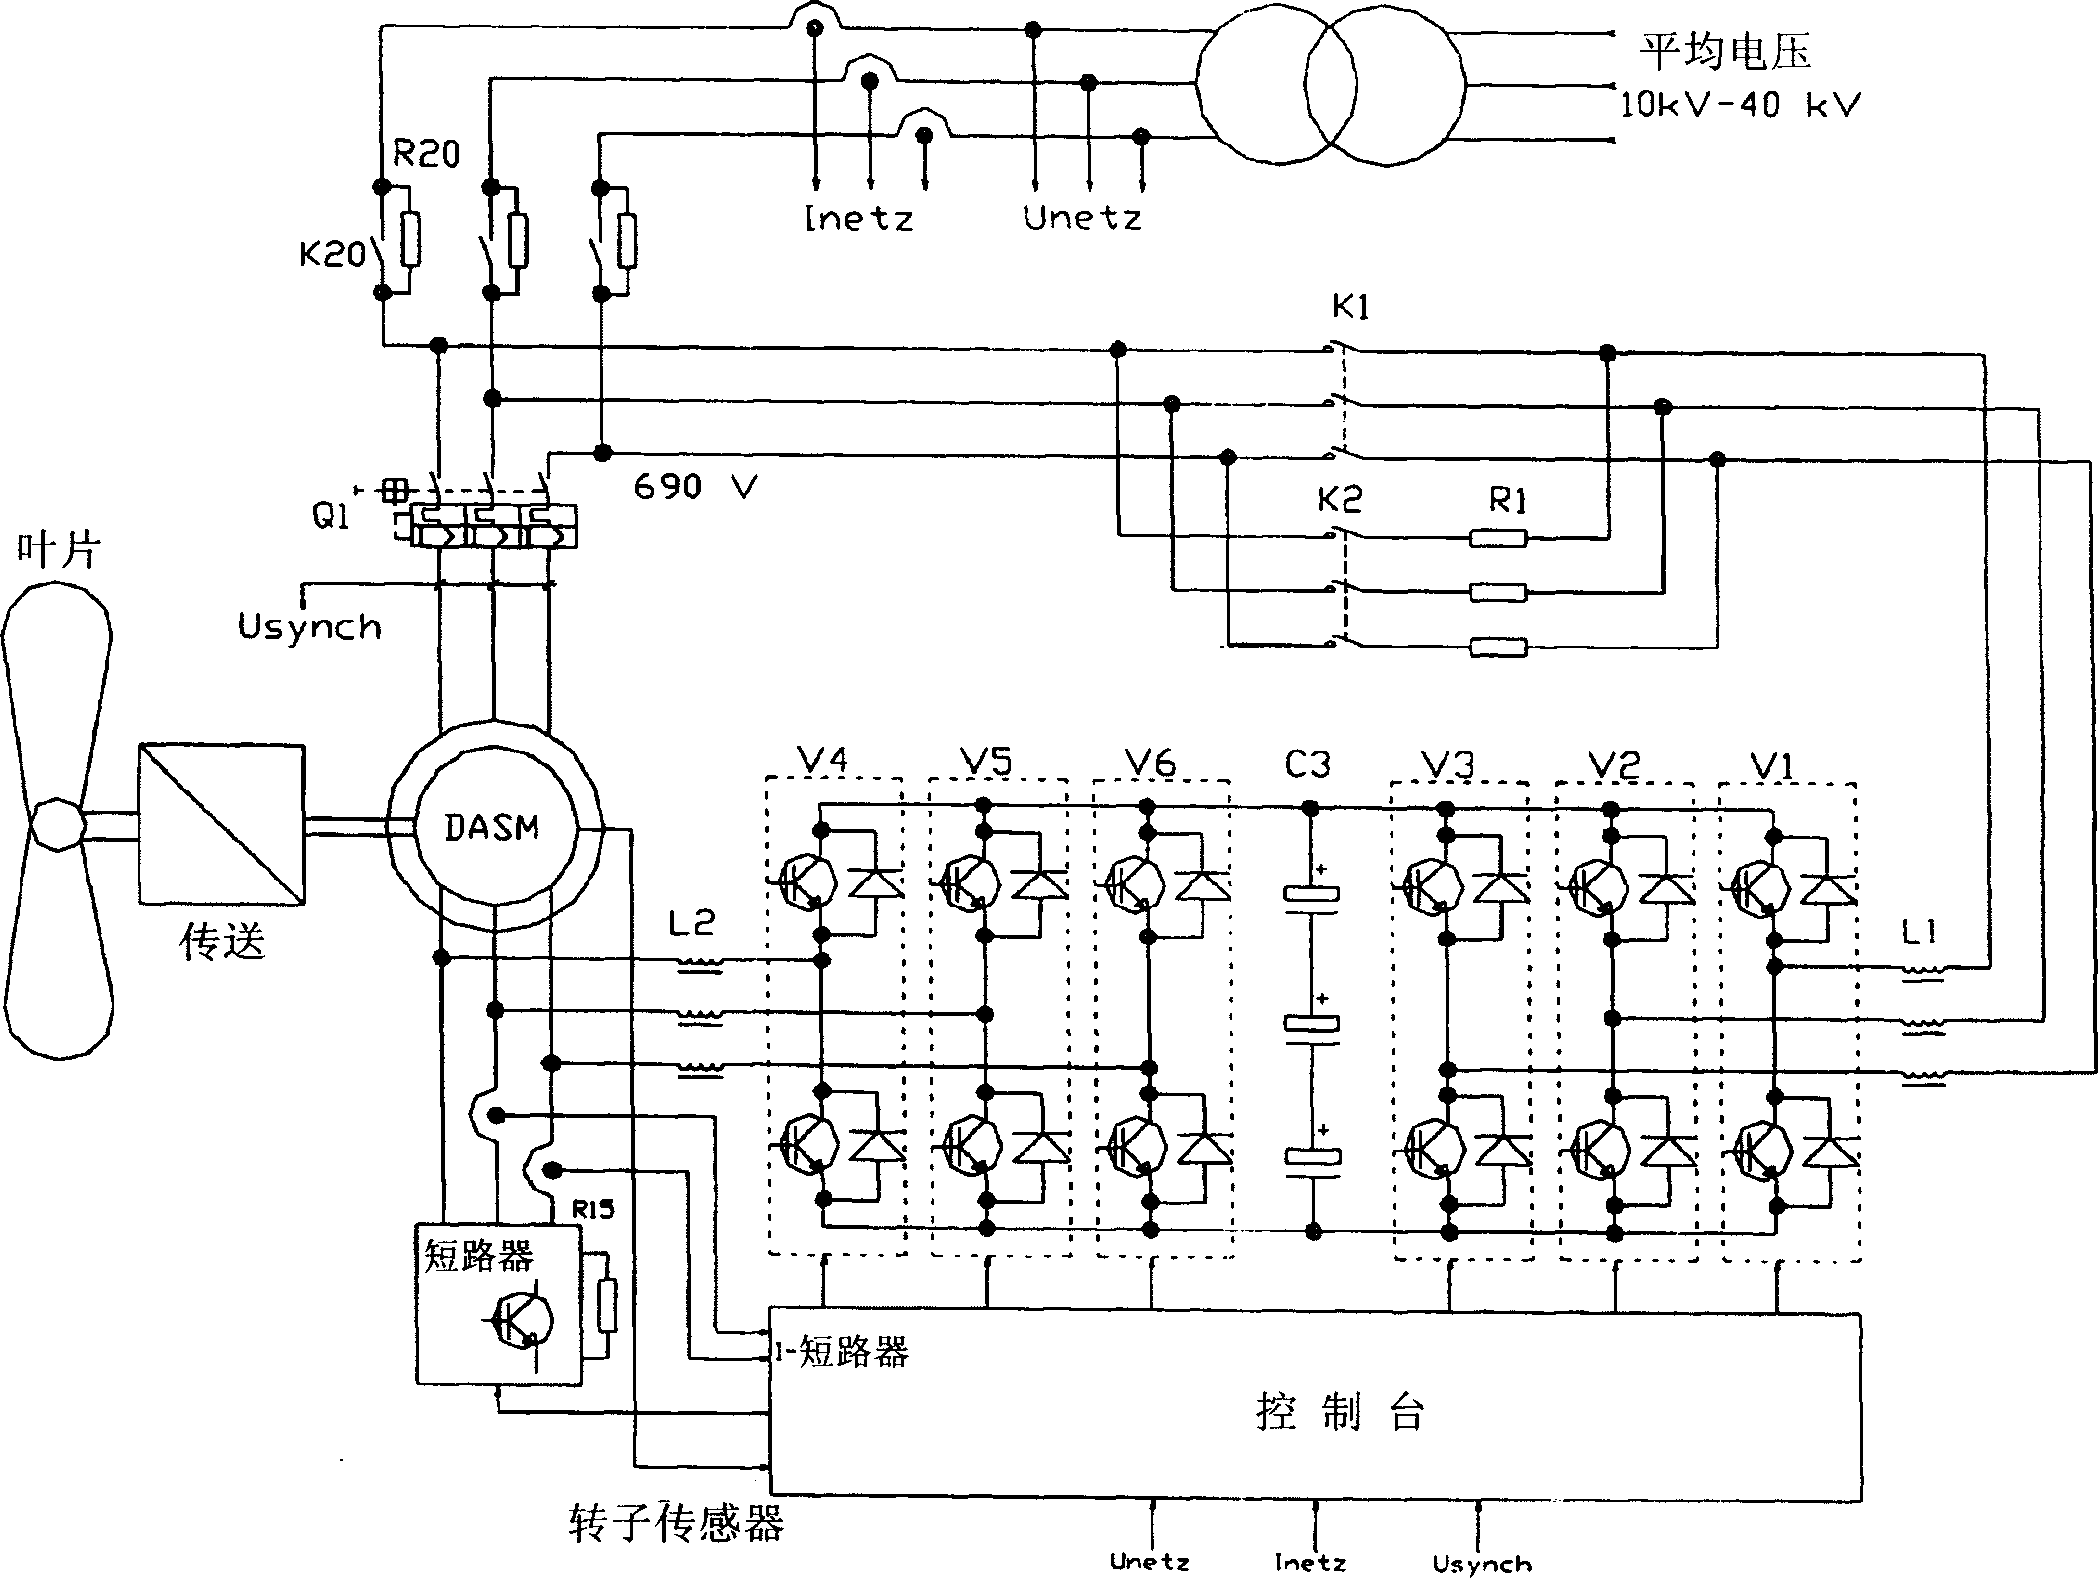 Circuit to be used in a wind power plant